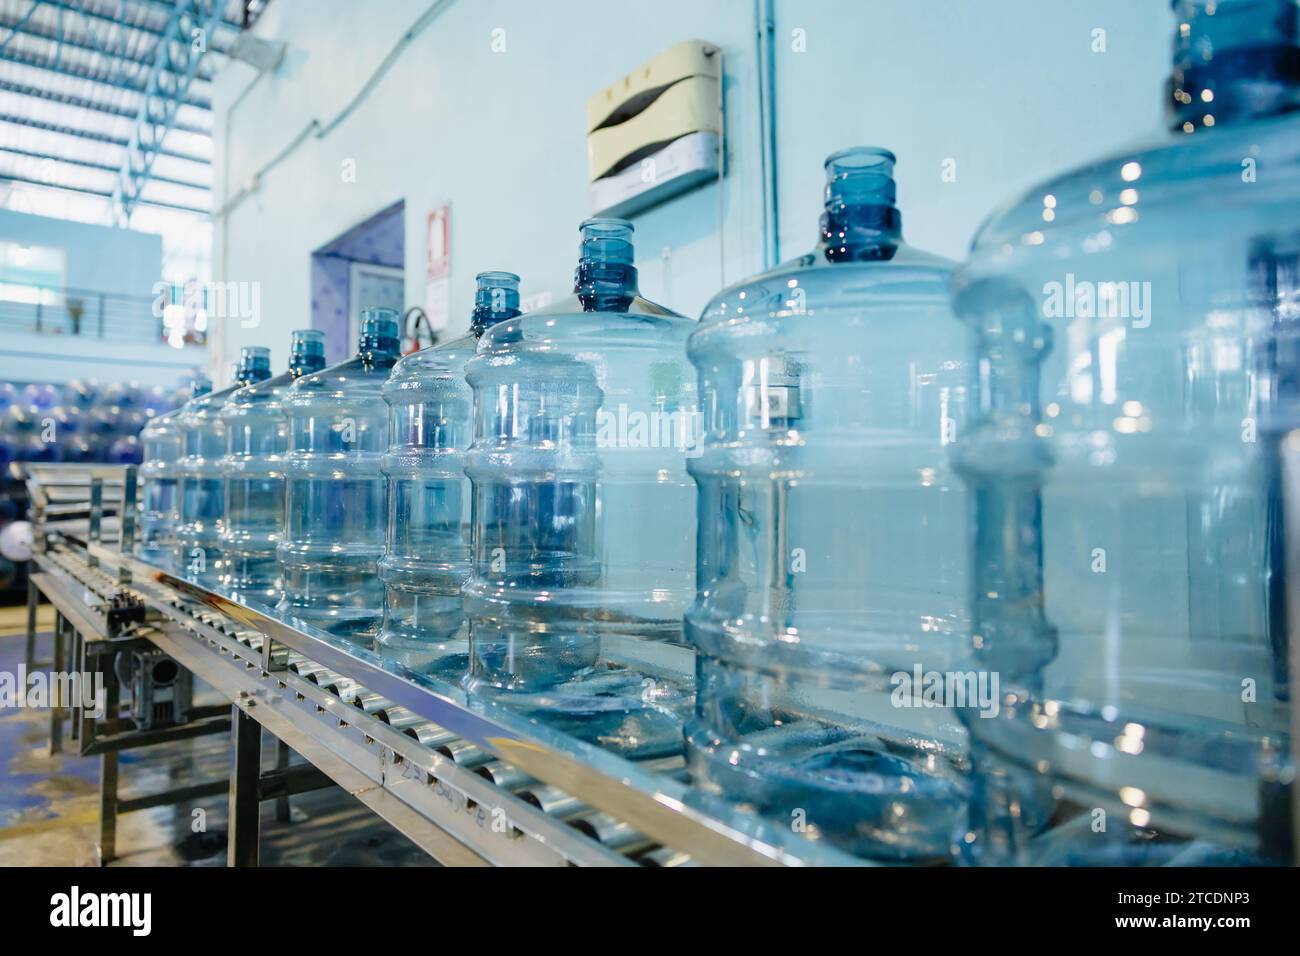 https://c8.alamy.com/comp/2TCDNP3/plastic-pet-drinking-water-gallon-bottle-clean-in-conveyor-production-line-in-drink-water-plant-factory-2TCDNP3.jpg